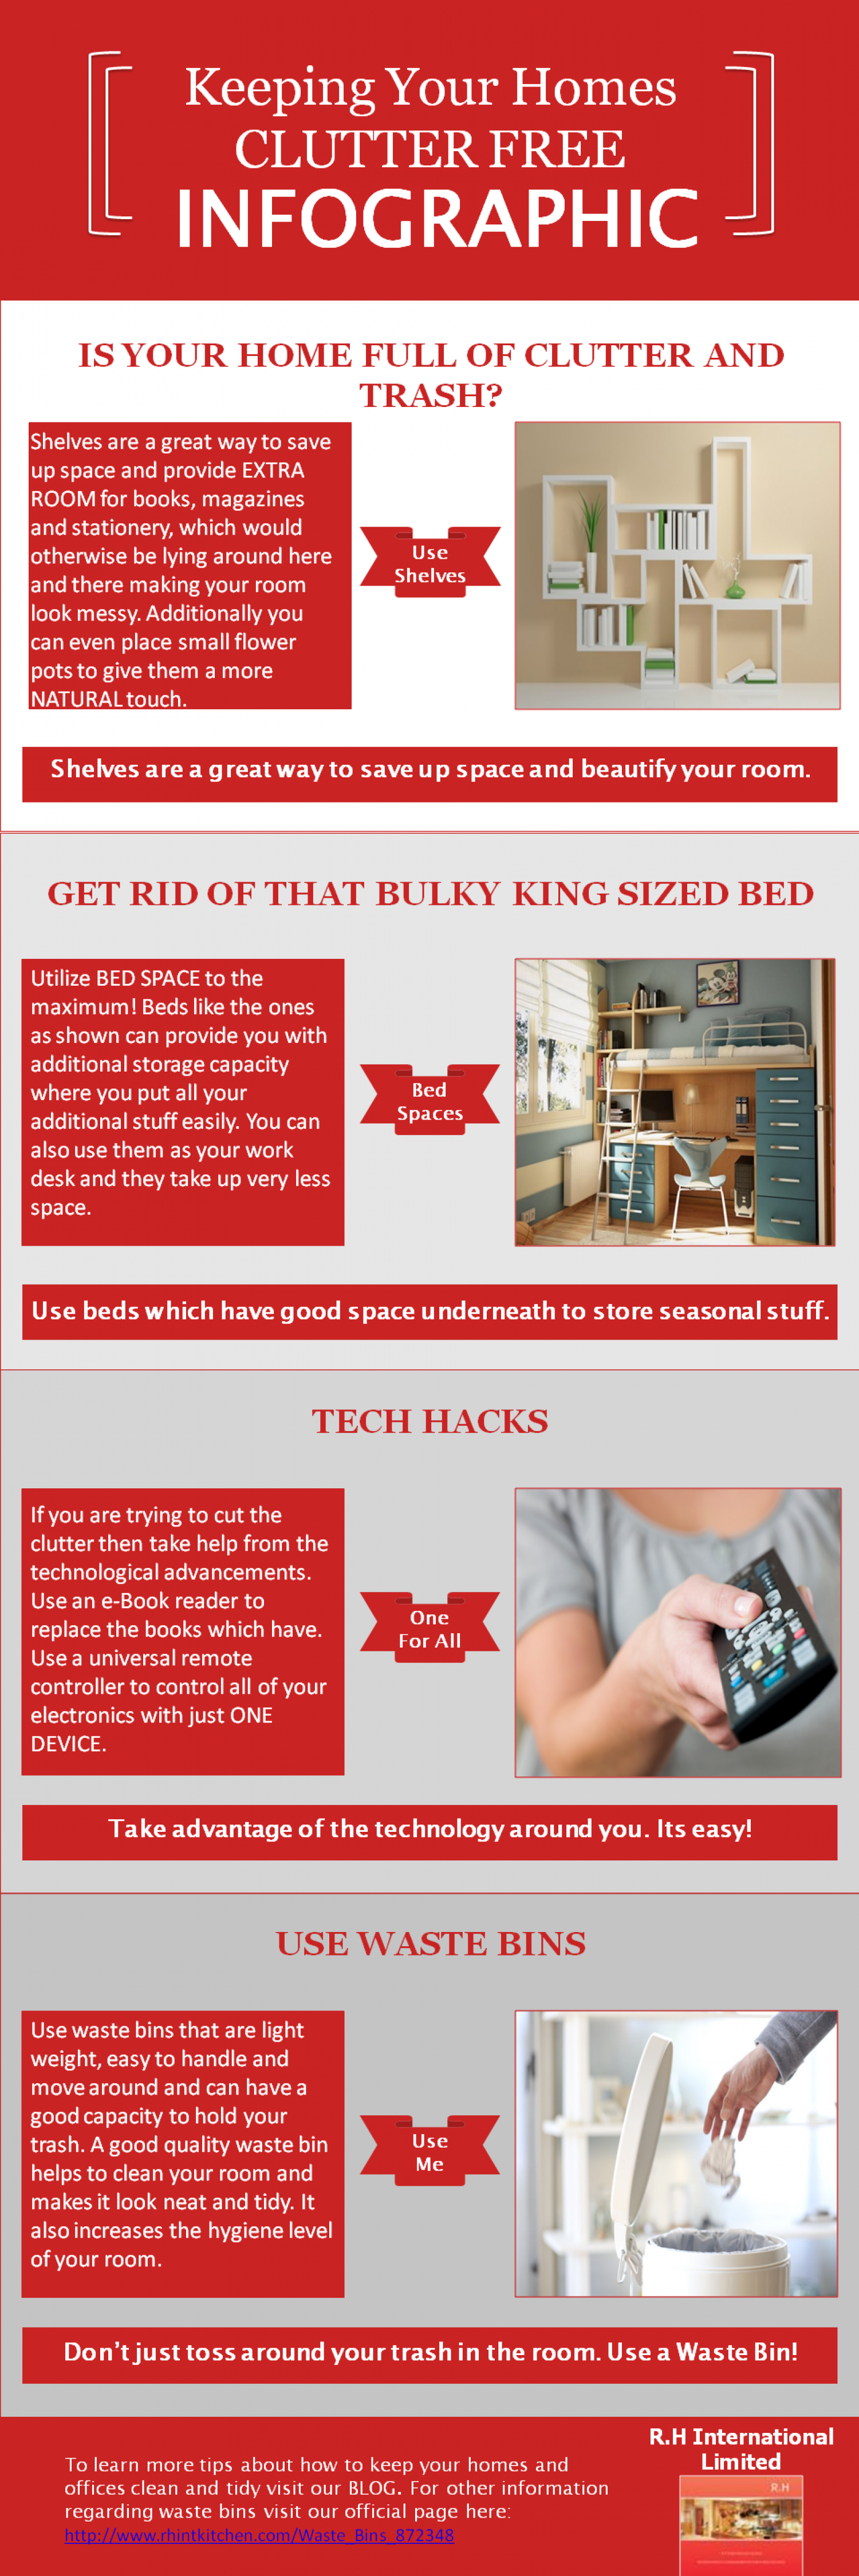 Organizing Stuff To Make Your Room Spacious Again! Infographic